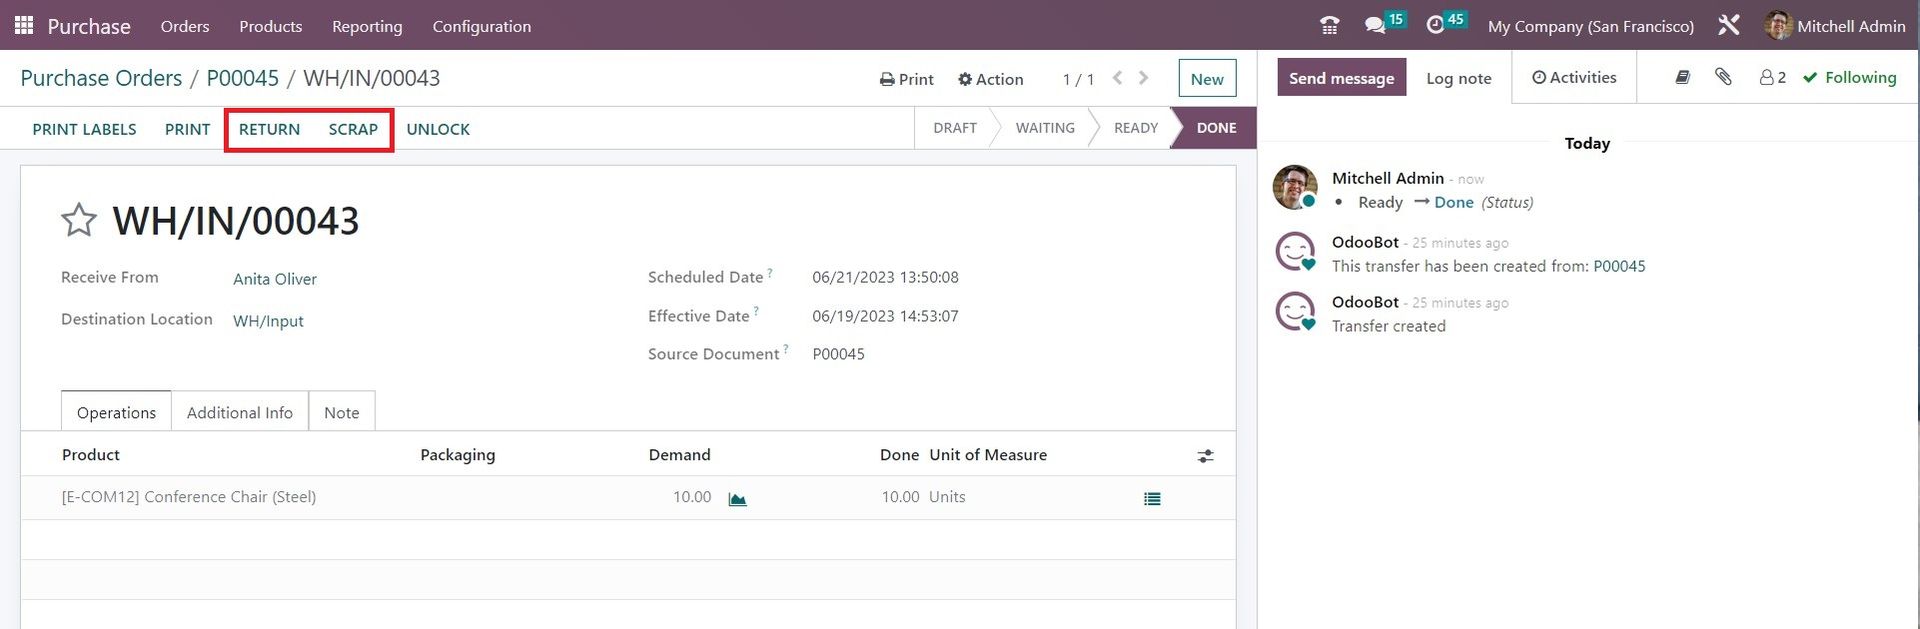 Confirming Deliveries and Receipts in Odoo - Midis - 17